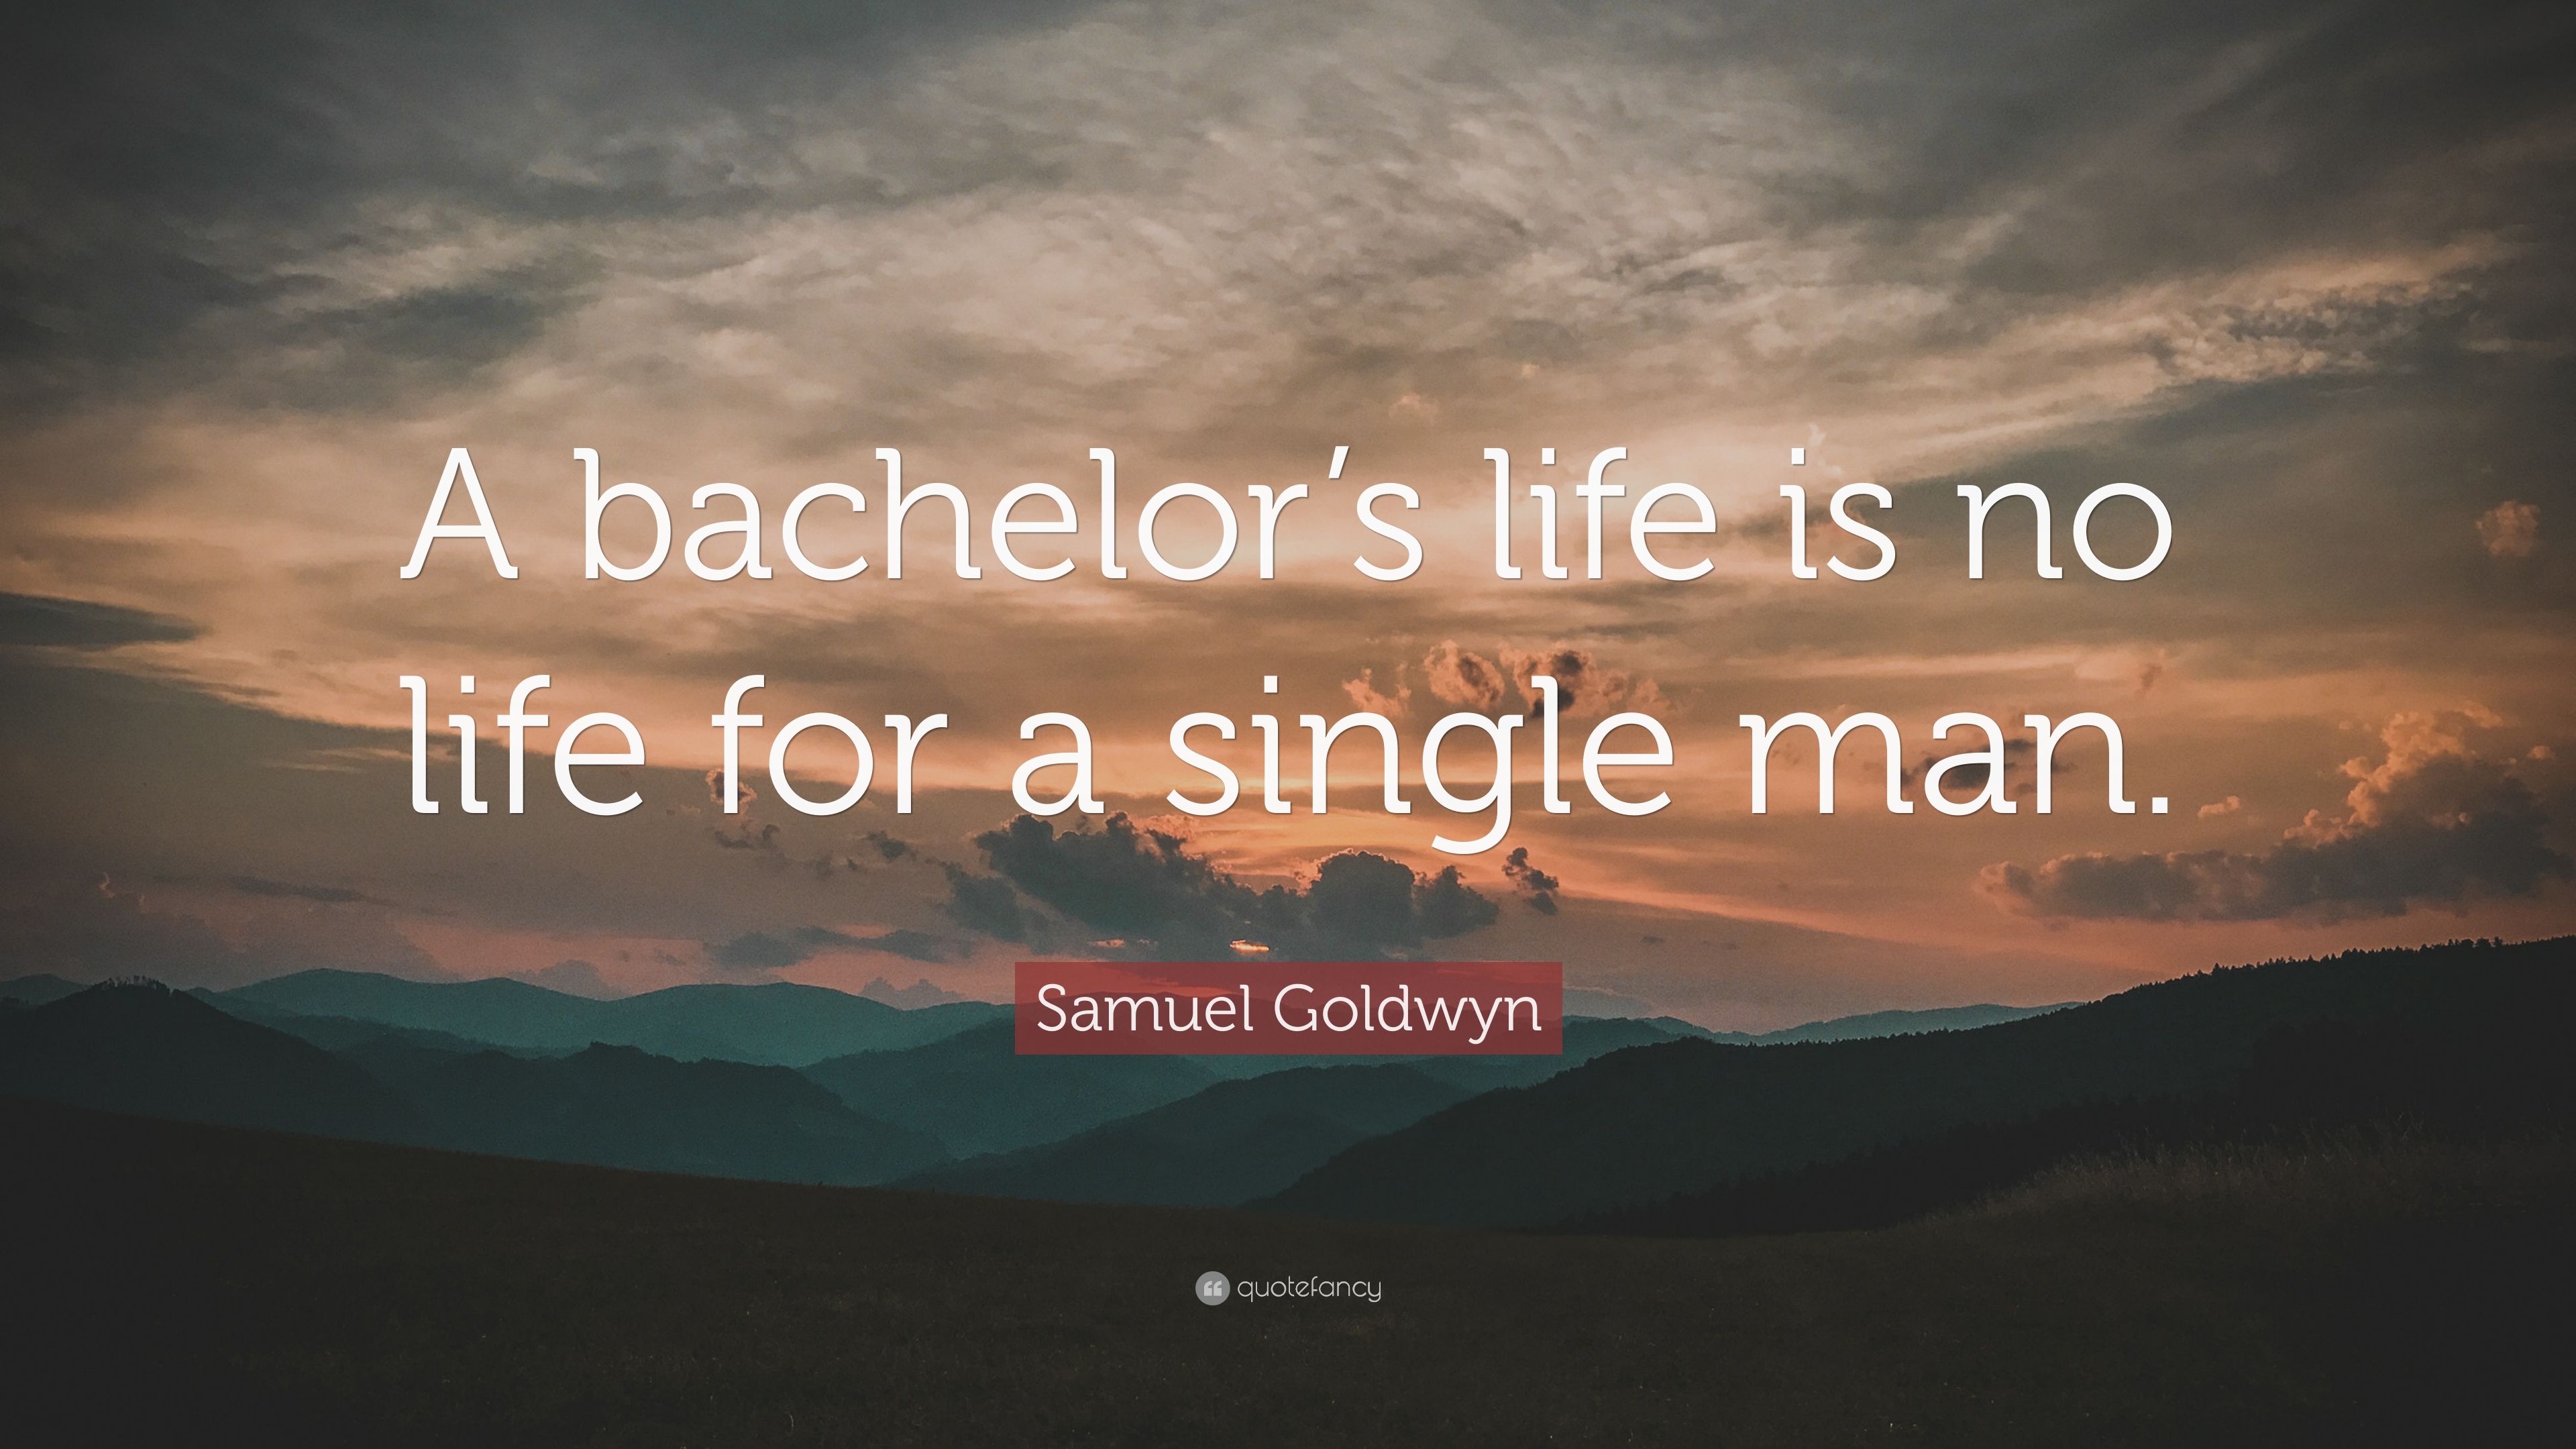 Samuel Goldwyn Quote: “A bachelor's life is no life for a single